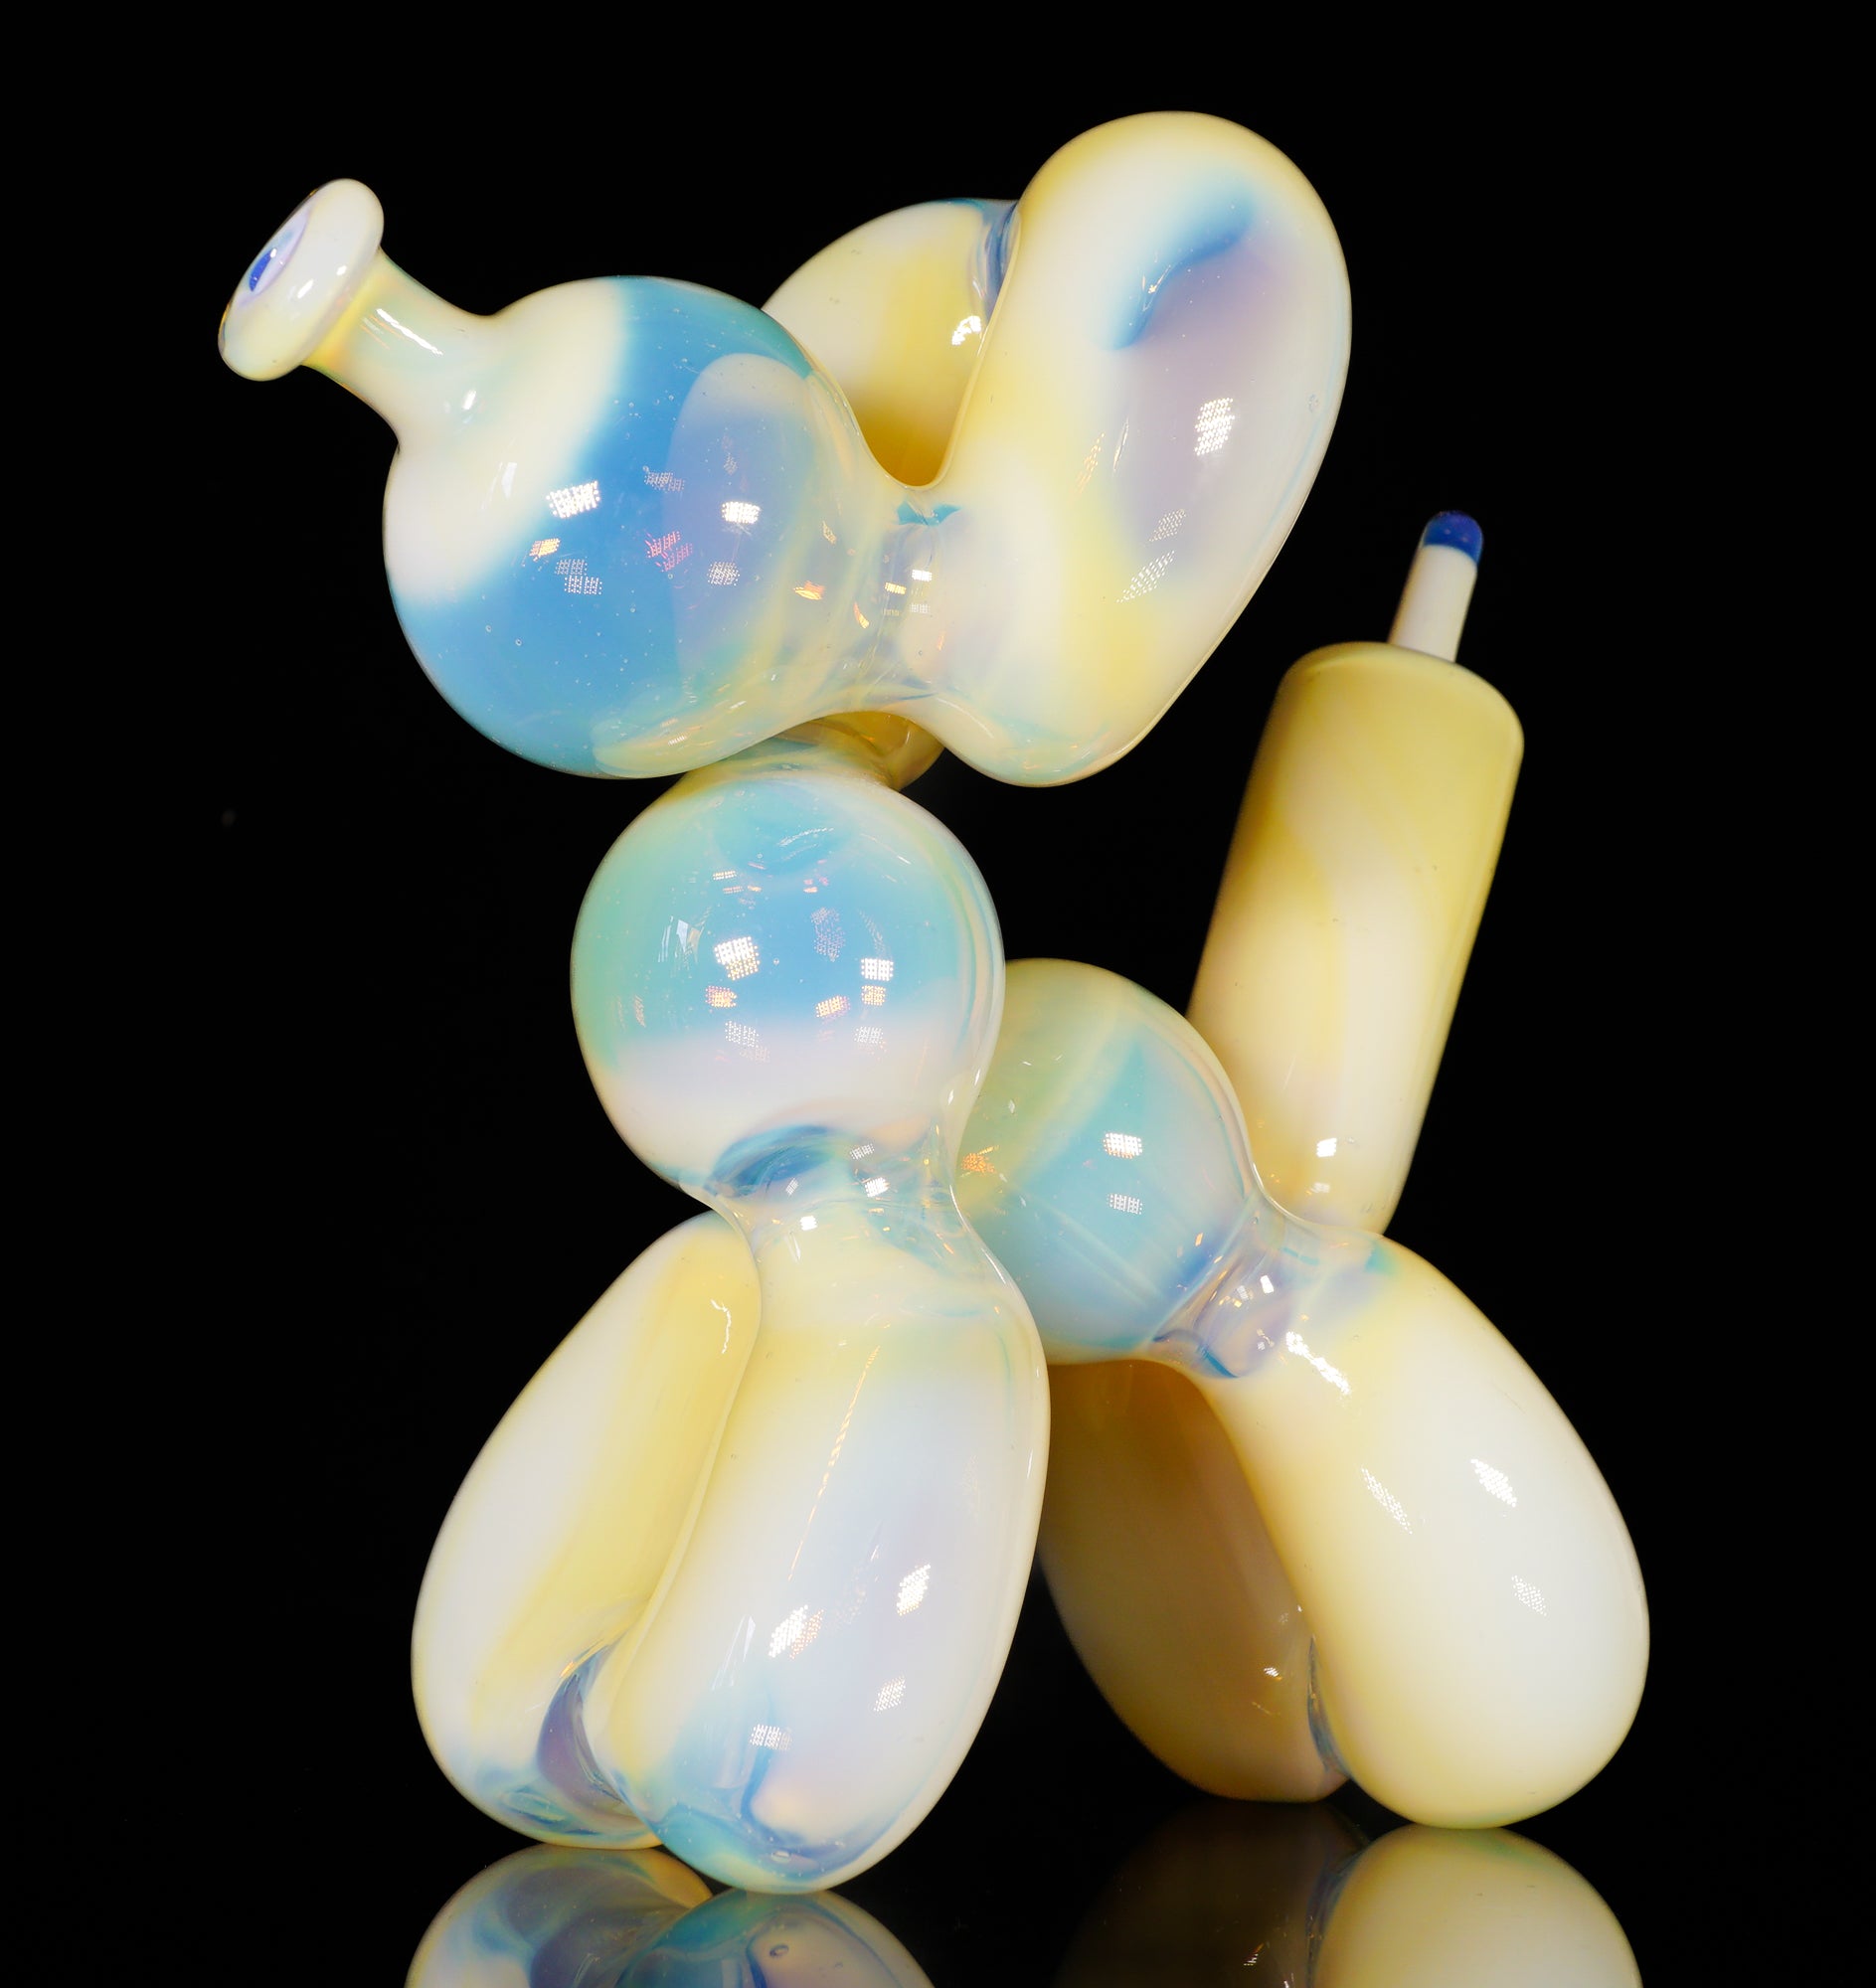 Northstar Yellow over Lucid Balloon Dog + Removable Tail – H